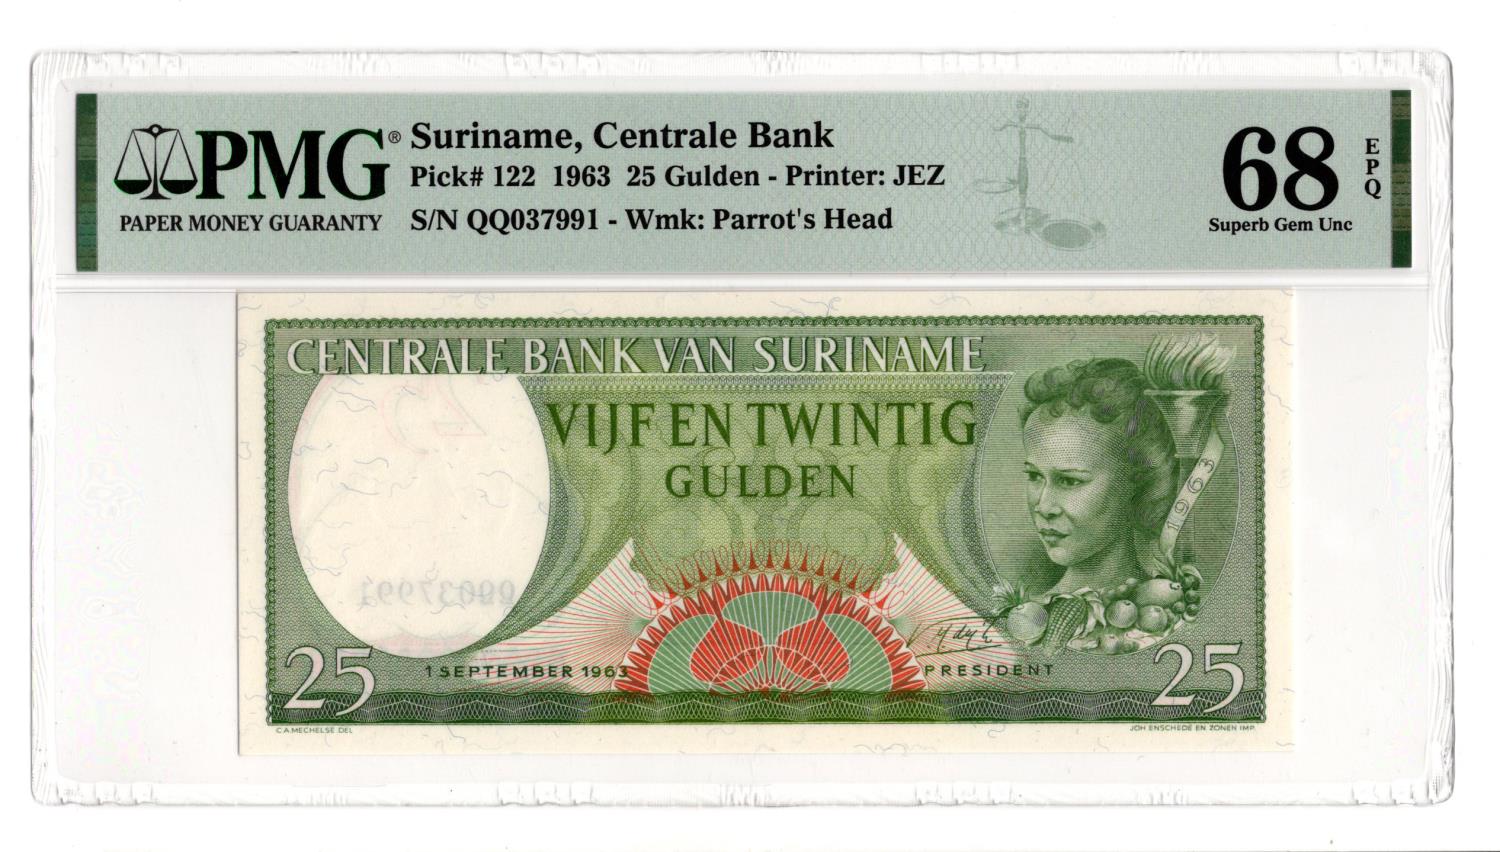 Suriname 25 Gulden dated 1st September 1963, serial QQ 037991 (TBB B508b, Pick122) in PMG holder